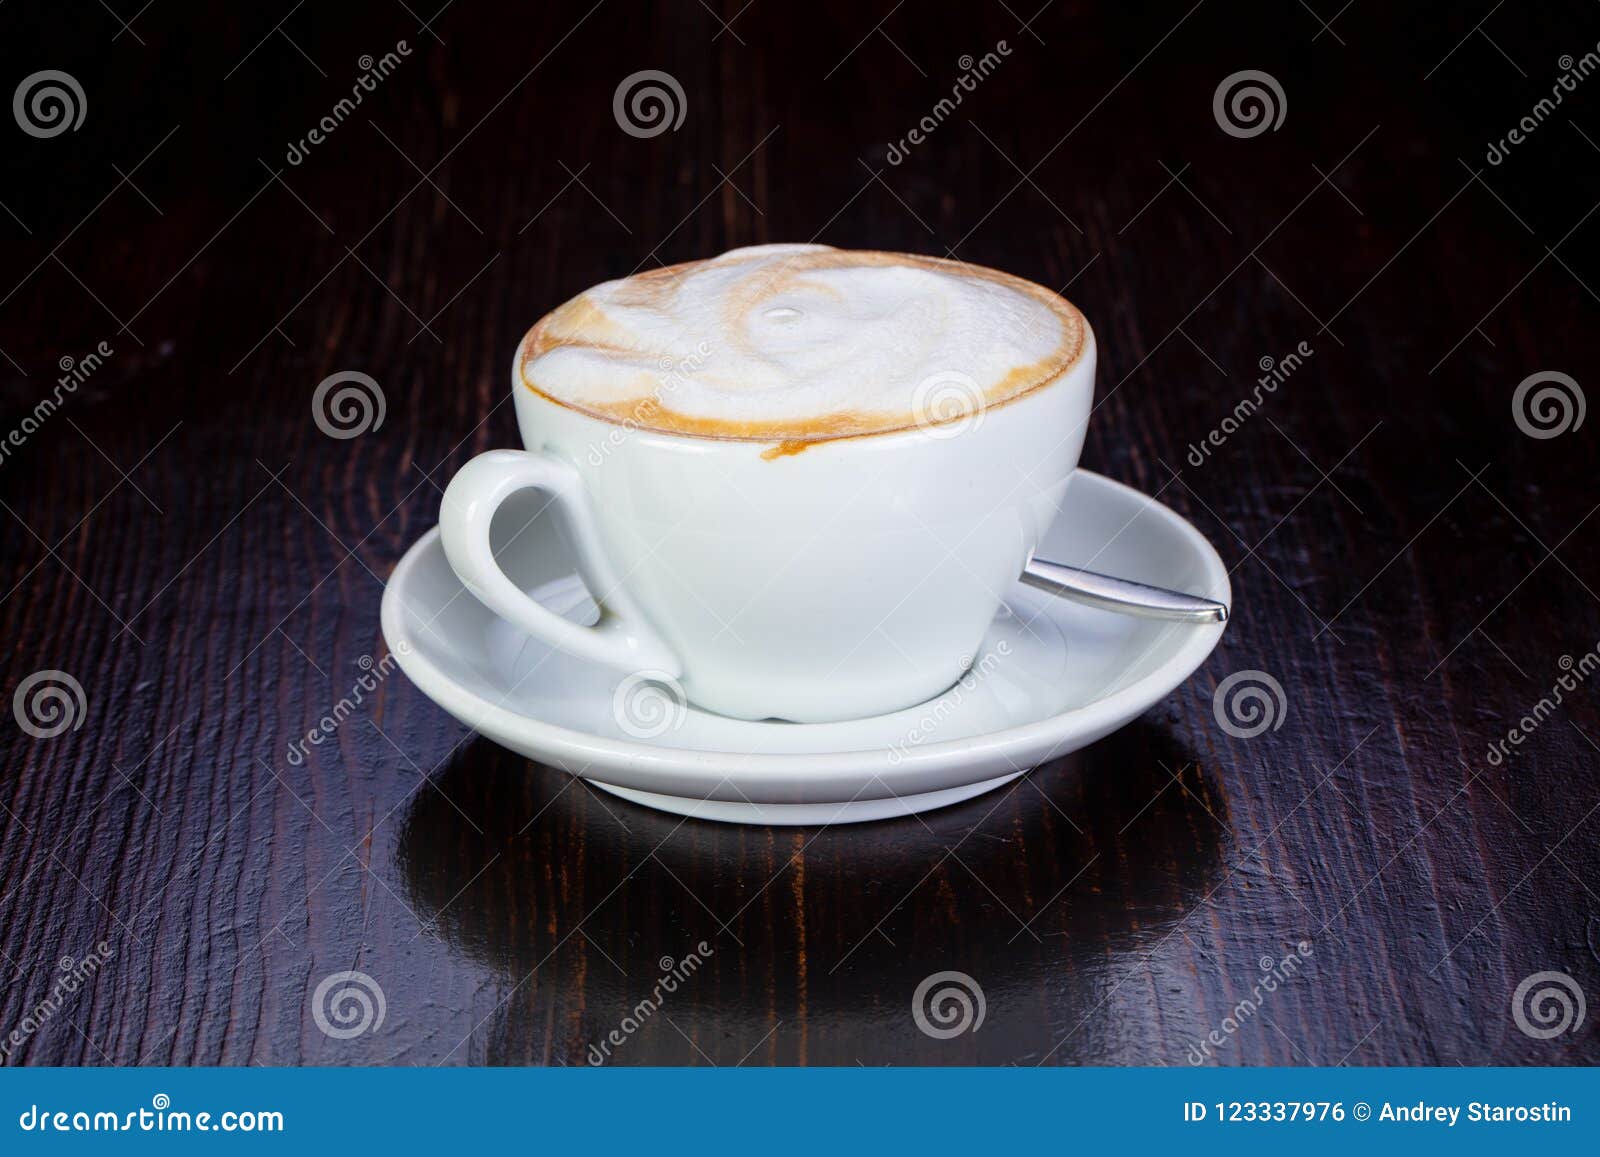 capuccino coffee cup